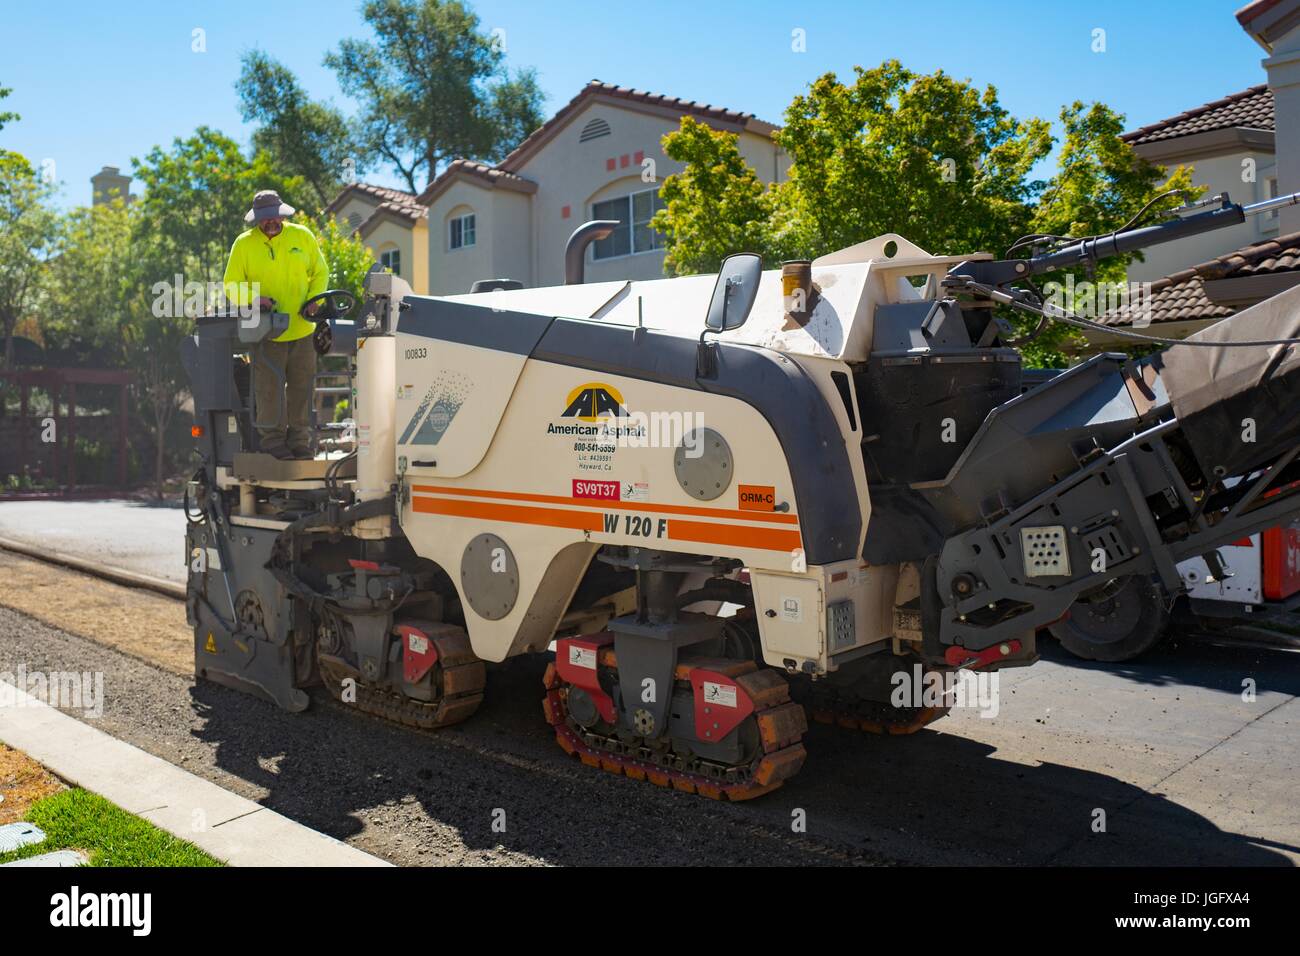 A construction worker for American Asphalt, wearing a bright yellow high visibility vest, steers a machine as it removes asphalt during a road construction and resurfacing project in the San Francisco Bay Area suburb of San Ramon, California, June 26, 2017. Stock Photo